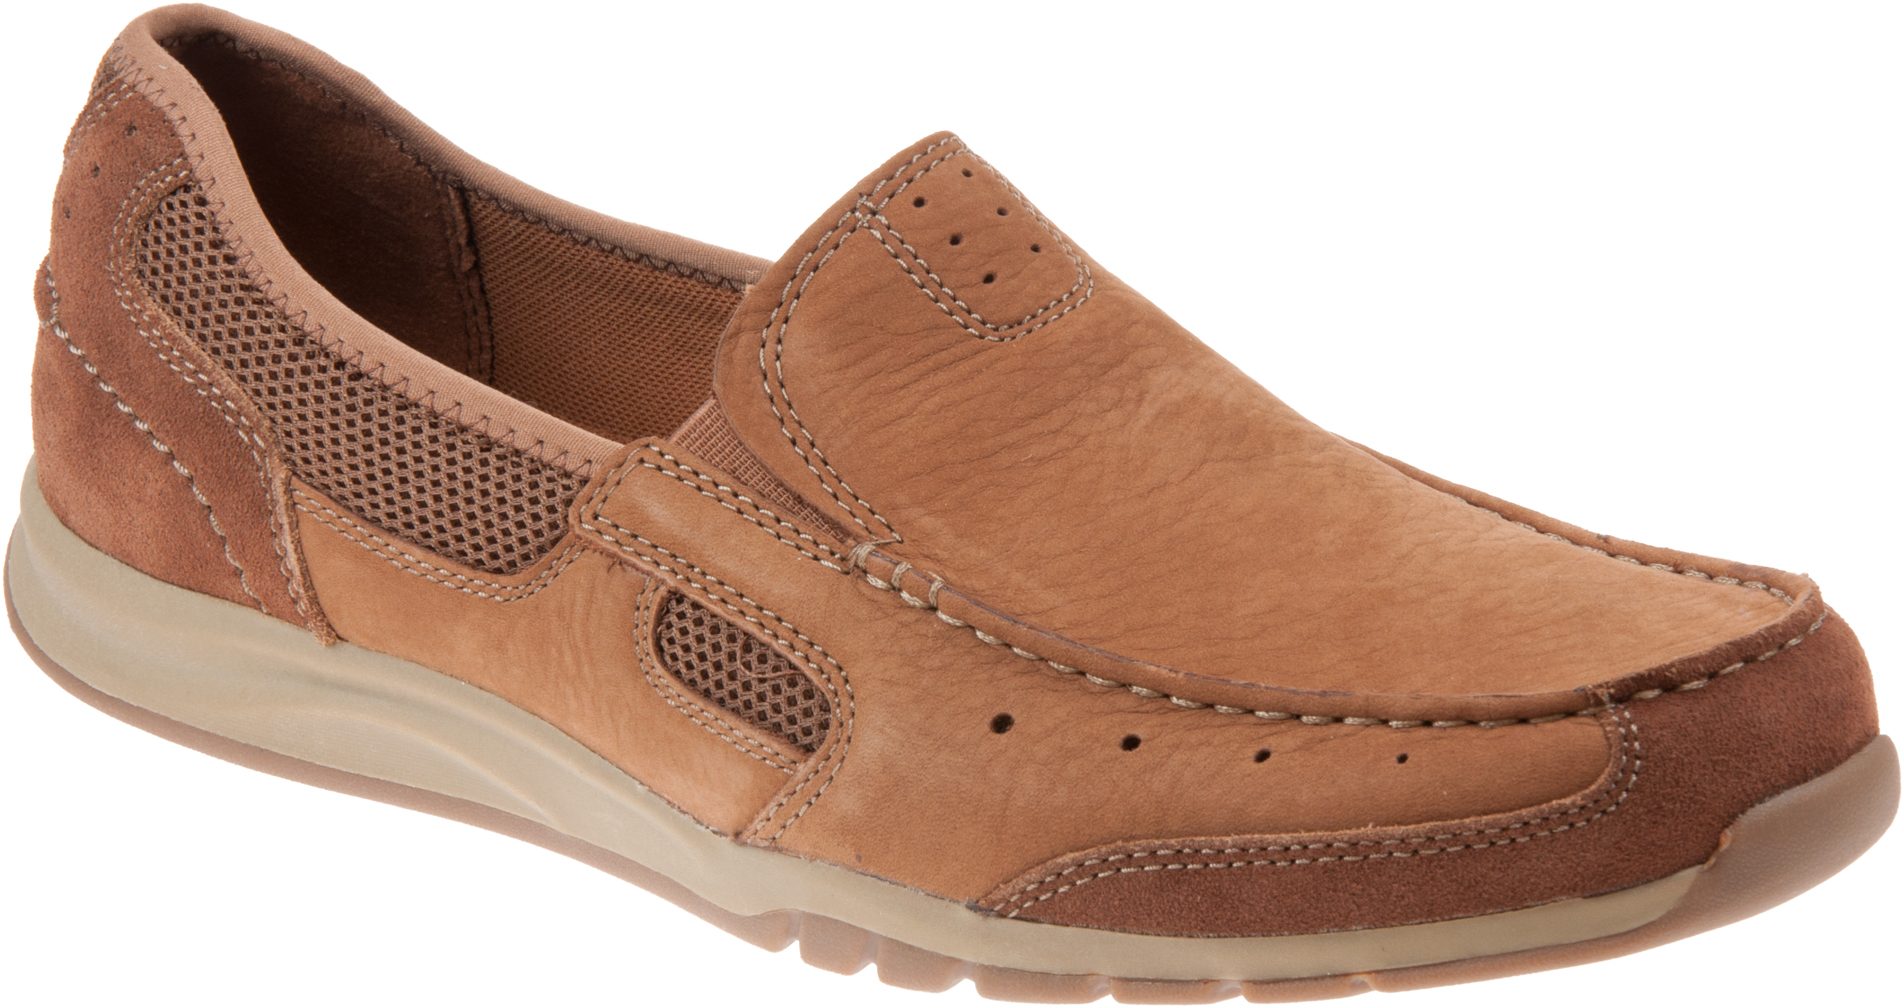 Clarks Spanish Tobacco 26127214 - Shoes - Humphries Shoes